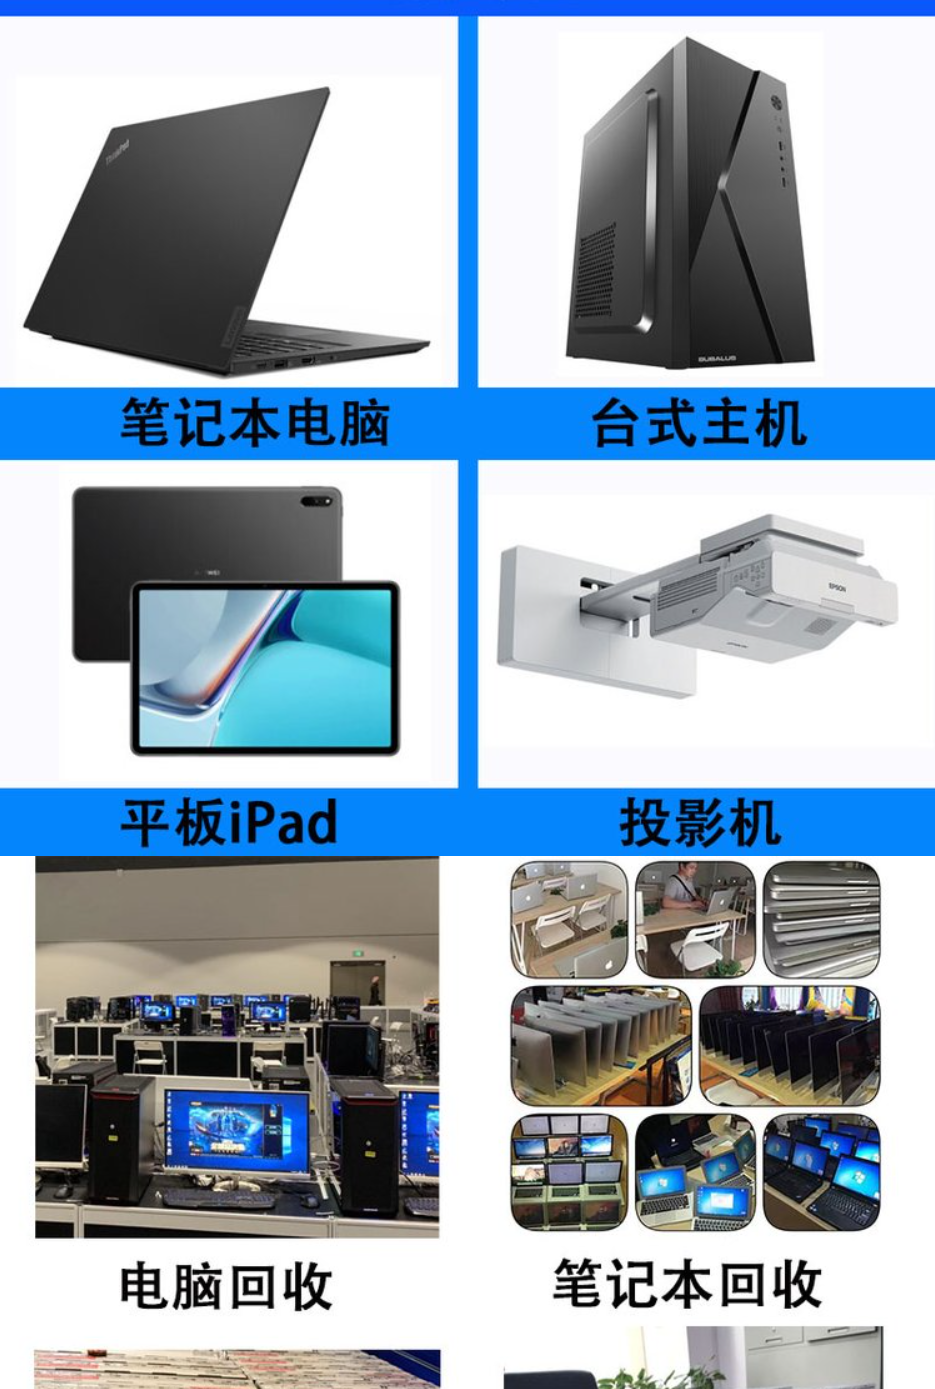 Apple Computer Dual System Laptop System Installation and Assembly Desktop Recycling Used Mobile Phones